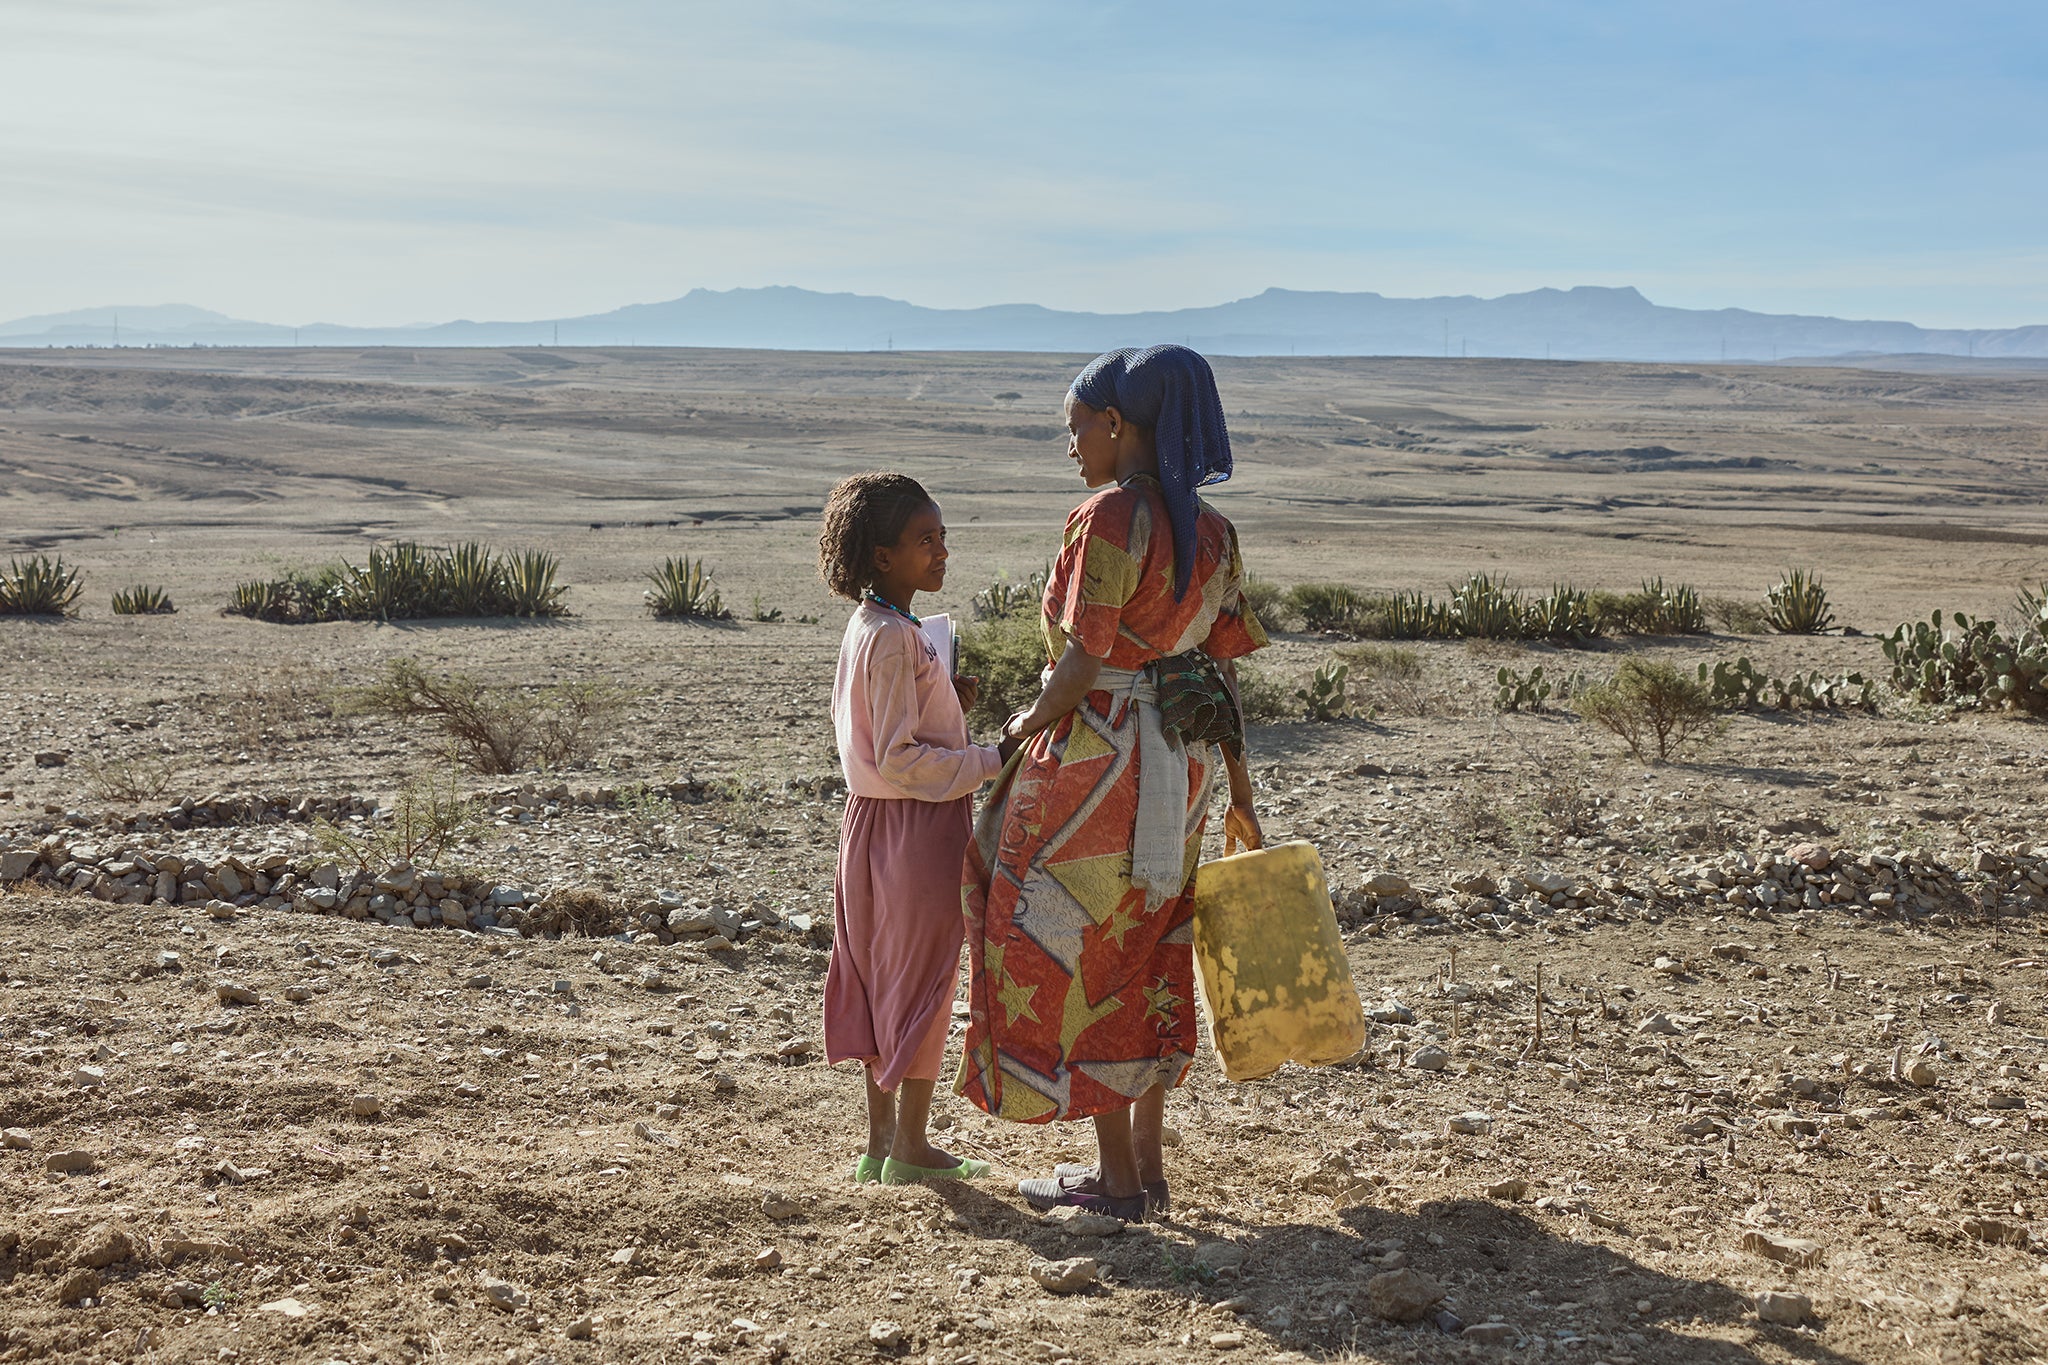 Fitsum could only send one of her children to school, so she chose her daughter, Aradech